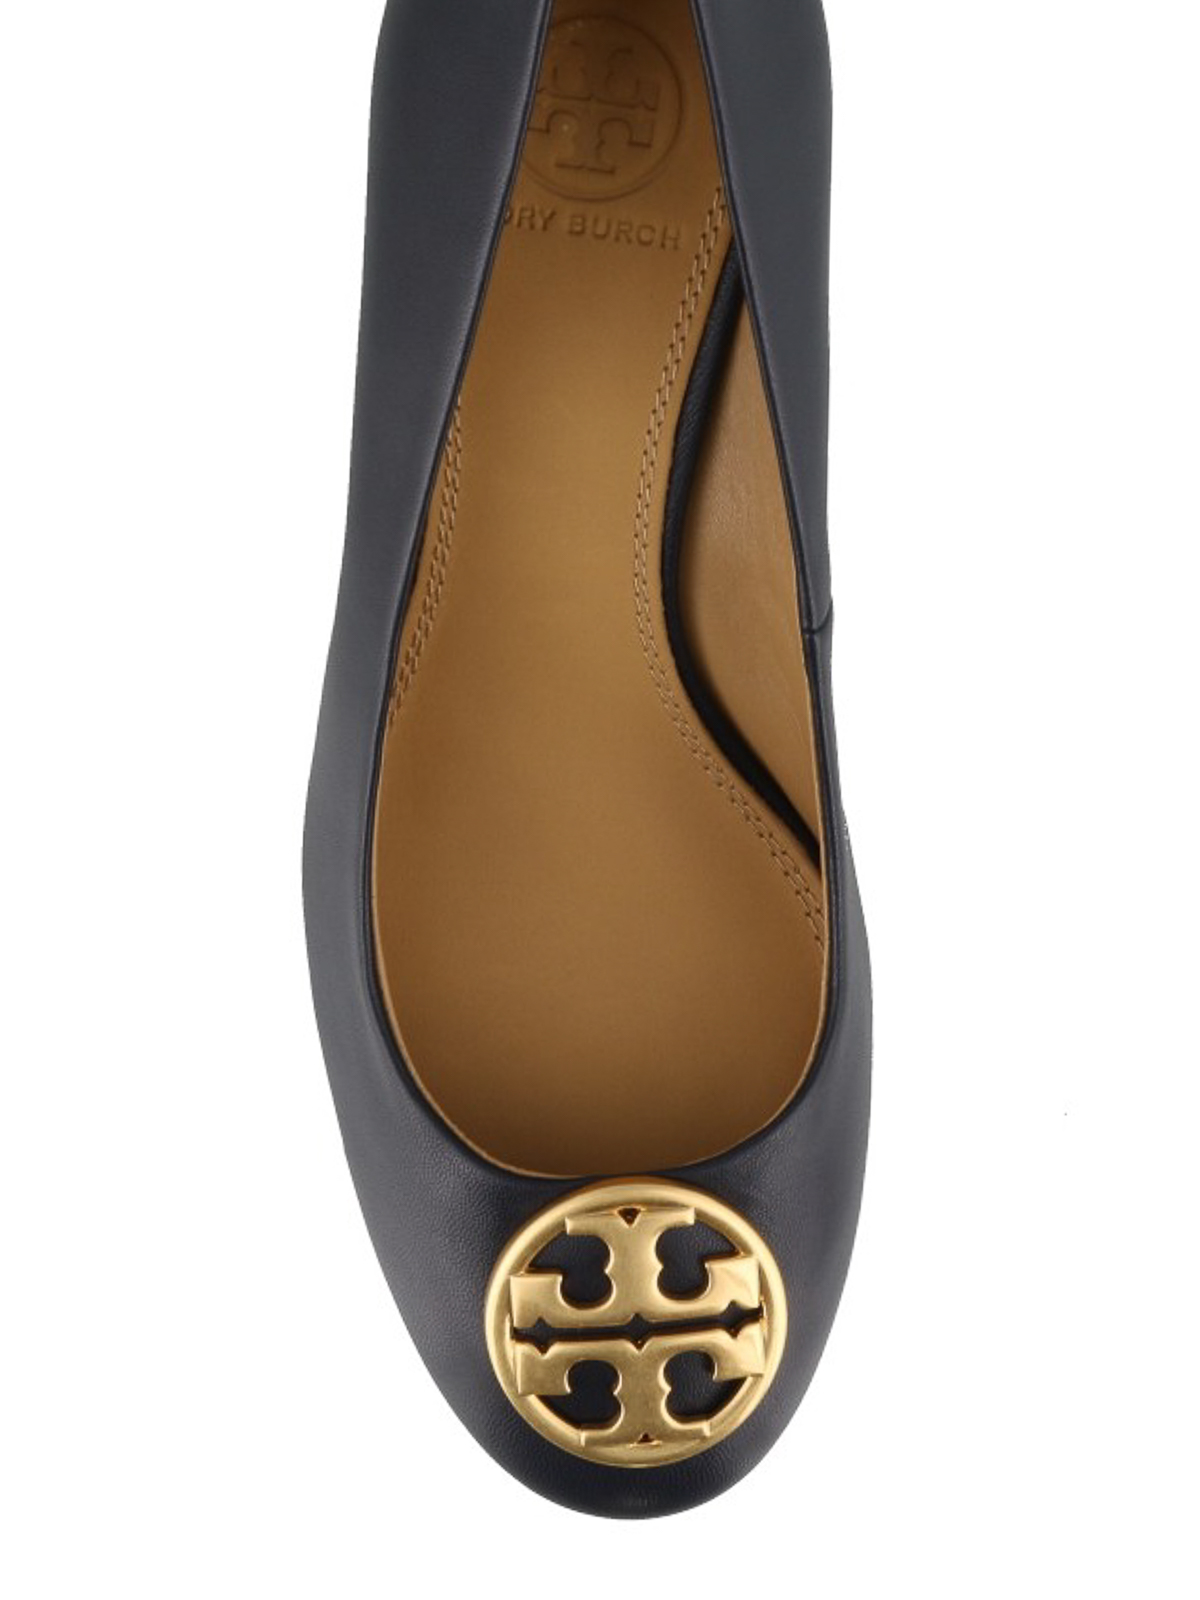 Court shoes Tory Burch - Chelsea wedge detailed leather pumps - 45899430